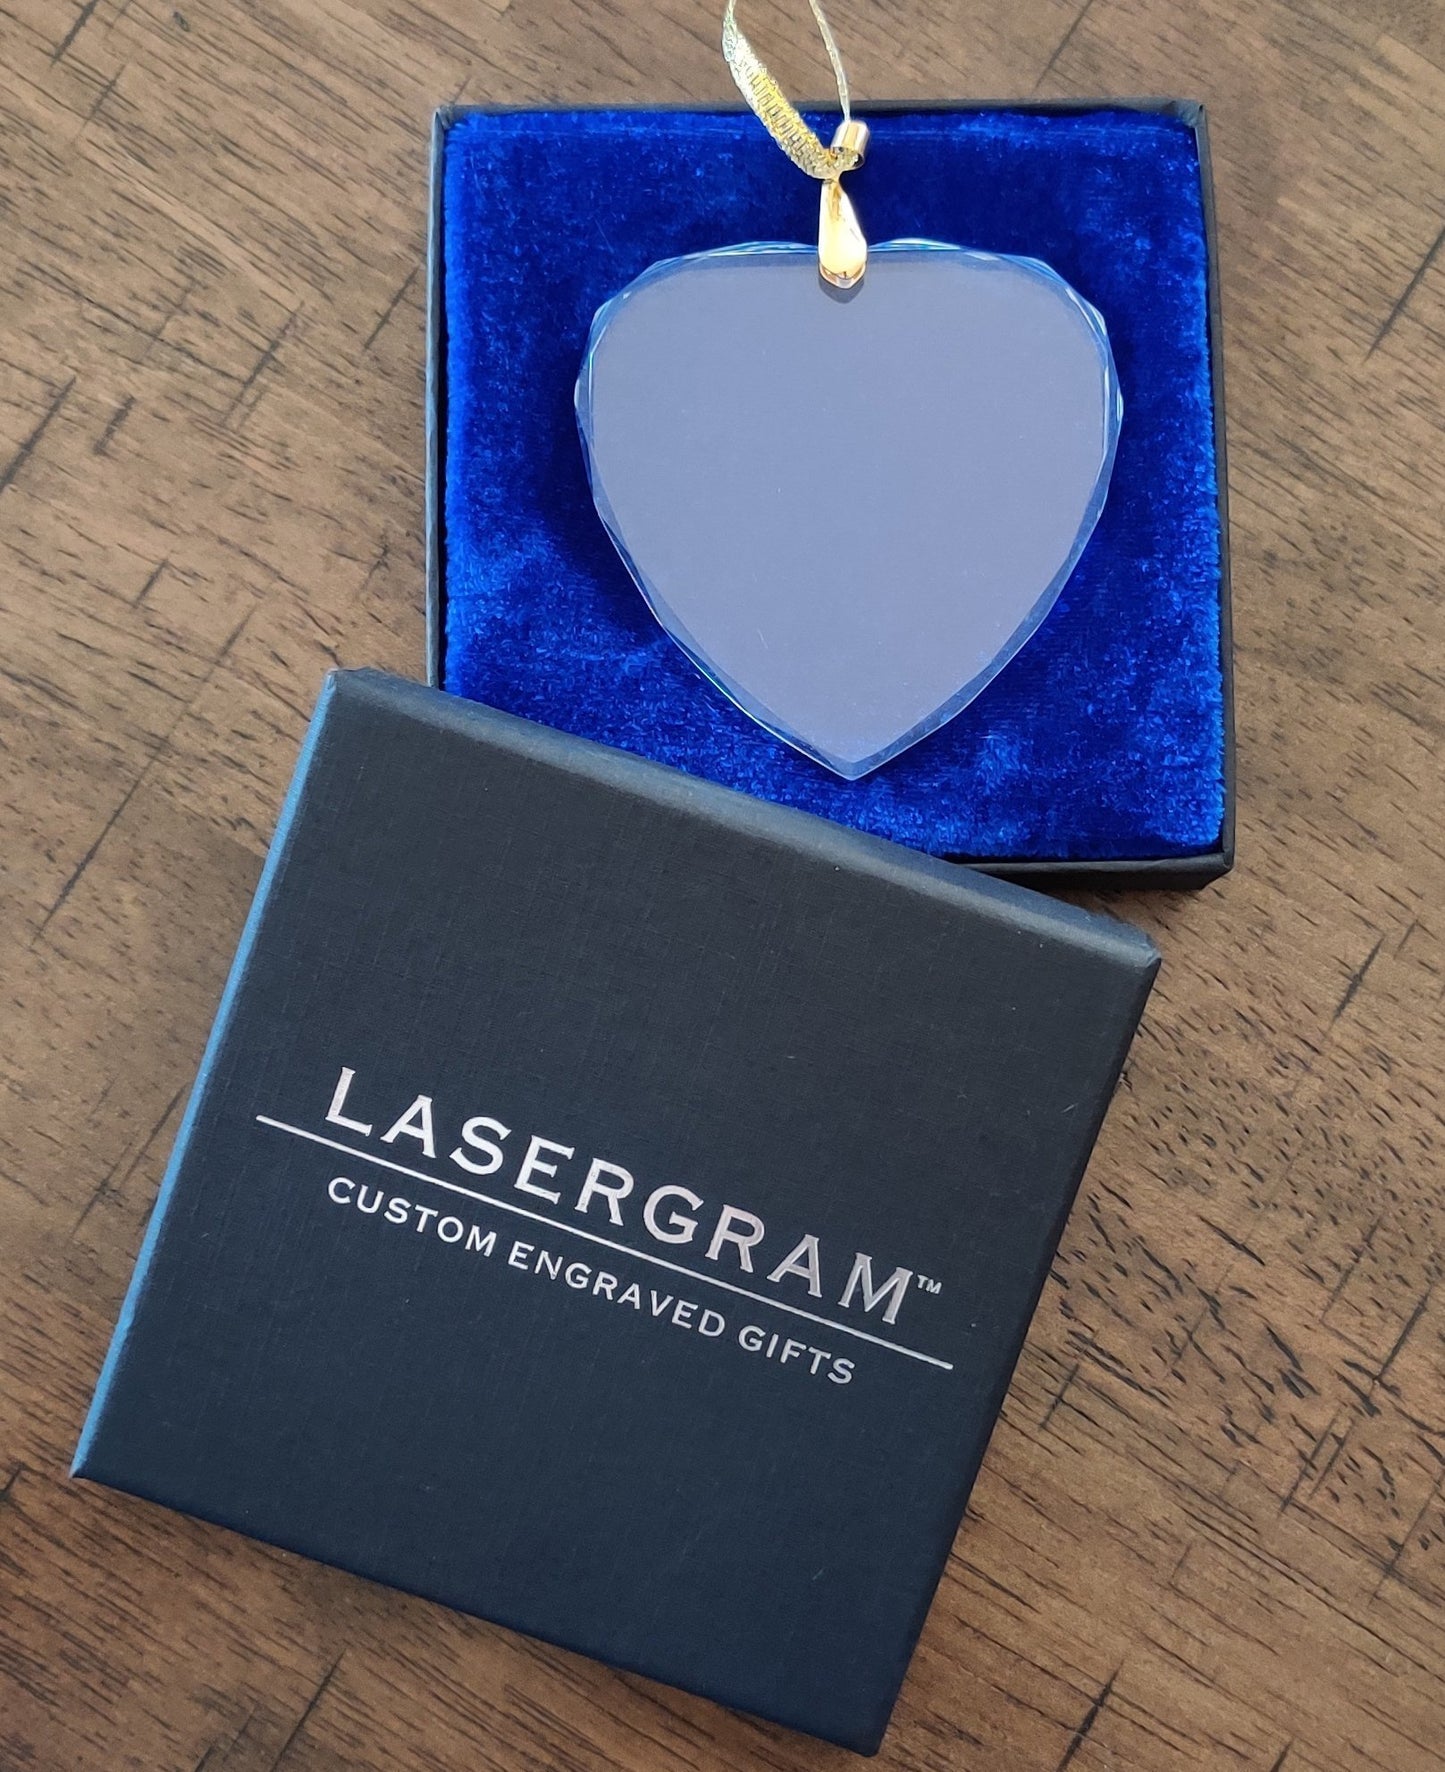 LaserGram Christmas Ornament, Snowboarder Woman, Personalized Engraving Included (Heart Shape)